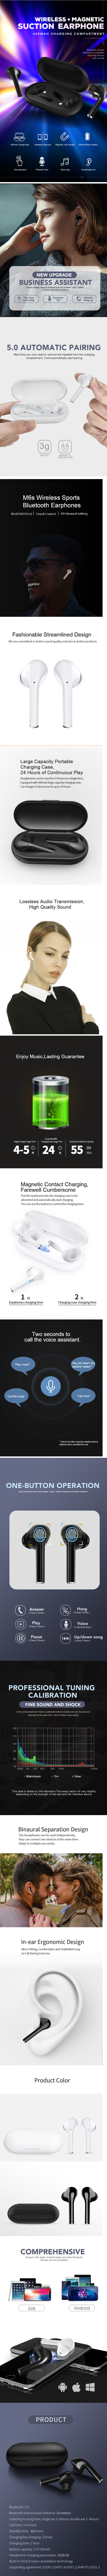 M6S TWS Earbuds Factory, Bluetooth Headset Factory, Bluetooth Earphone Factory, Sports Earphone Factory, Wireless Earphone Factory, Wireless Headset Factory, Wireless Headphone Factory, Bluetooth Headphone Factory, Airpods Factory,